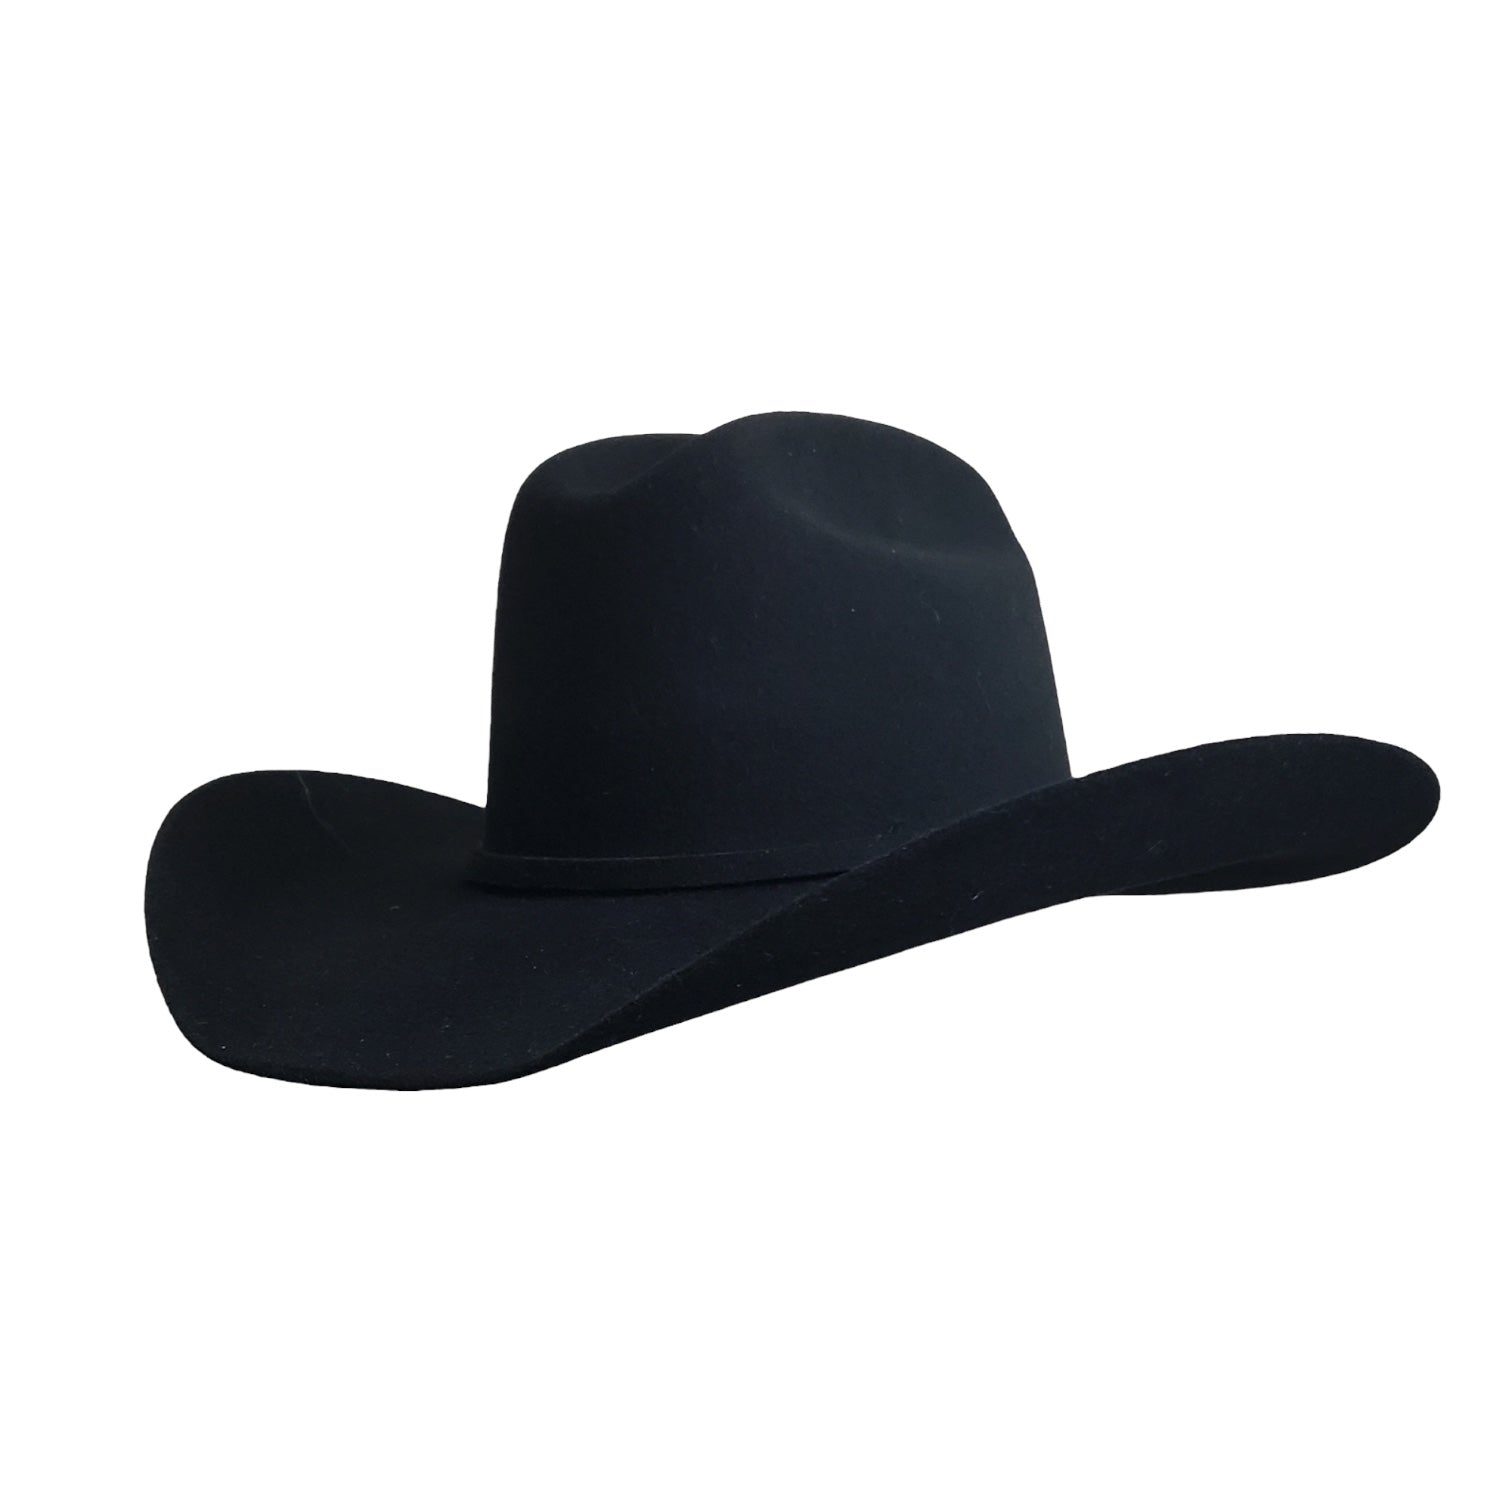 Gone Country Hats Men & Women's Hats Yellowstone Black - Wool Cashmere